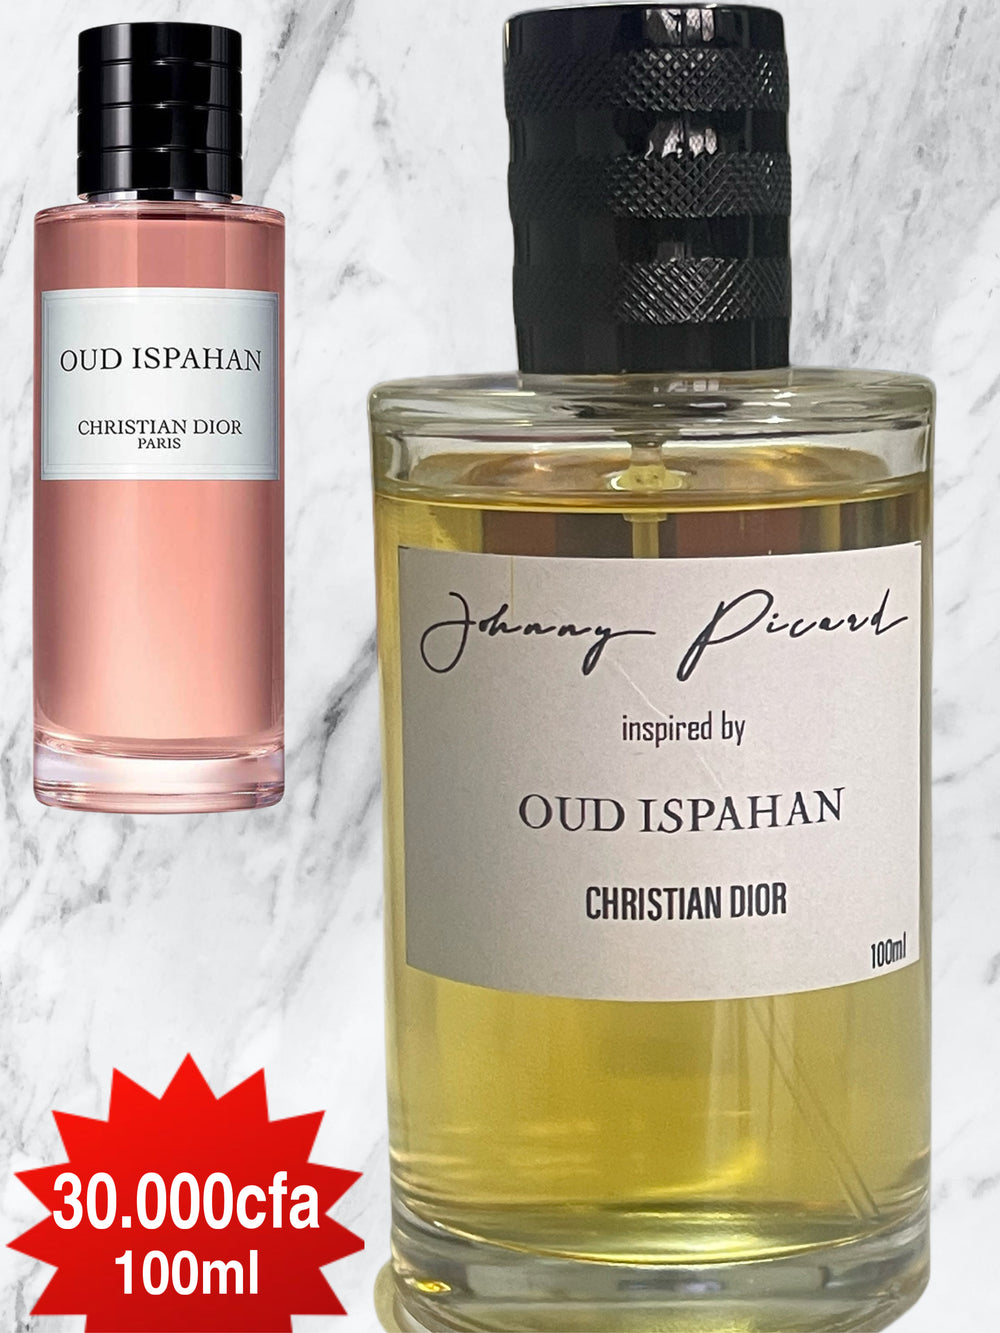 Johnny Picard Inspired by Oud Ispahan  CHRISTIAN DIOR